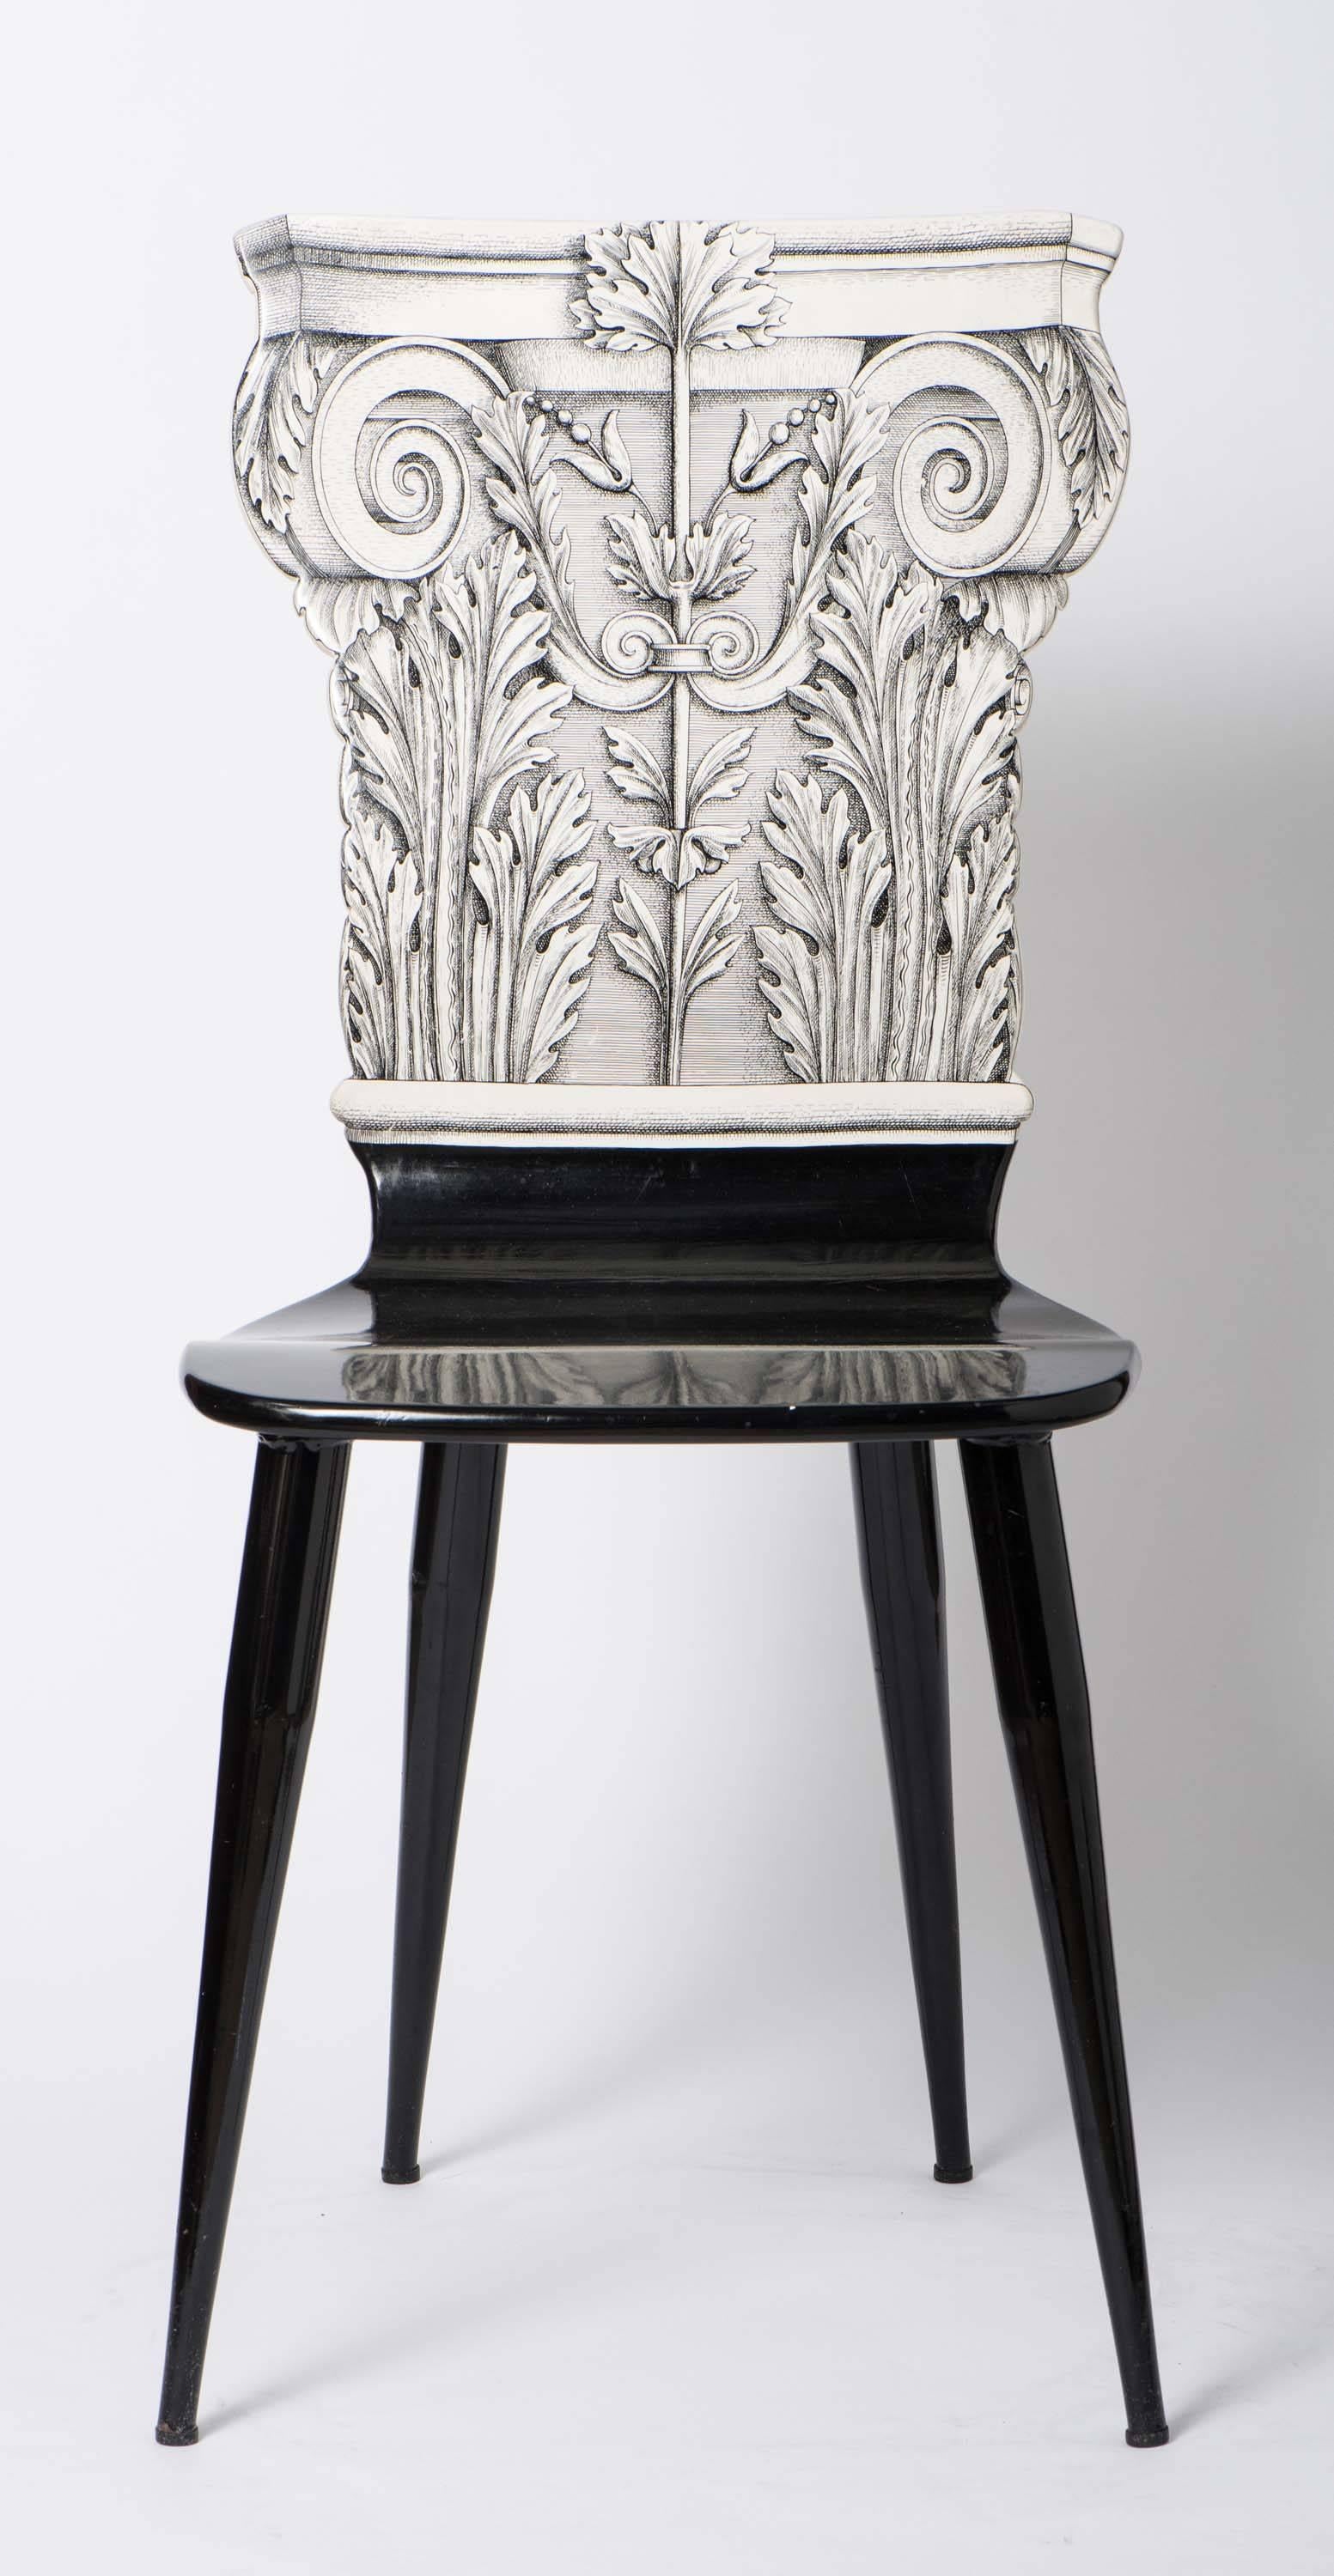 An early chair by Piero Fornasetti,
“Capitello Corinizio”
Lithographically printed.
Wood, lacquer and metal legs and base,
Italy, circa 1960.
Measures: 94 cm high x 41 cm wide x 45 cm deep.
 